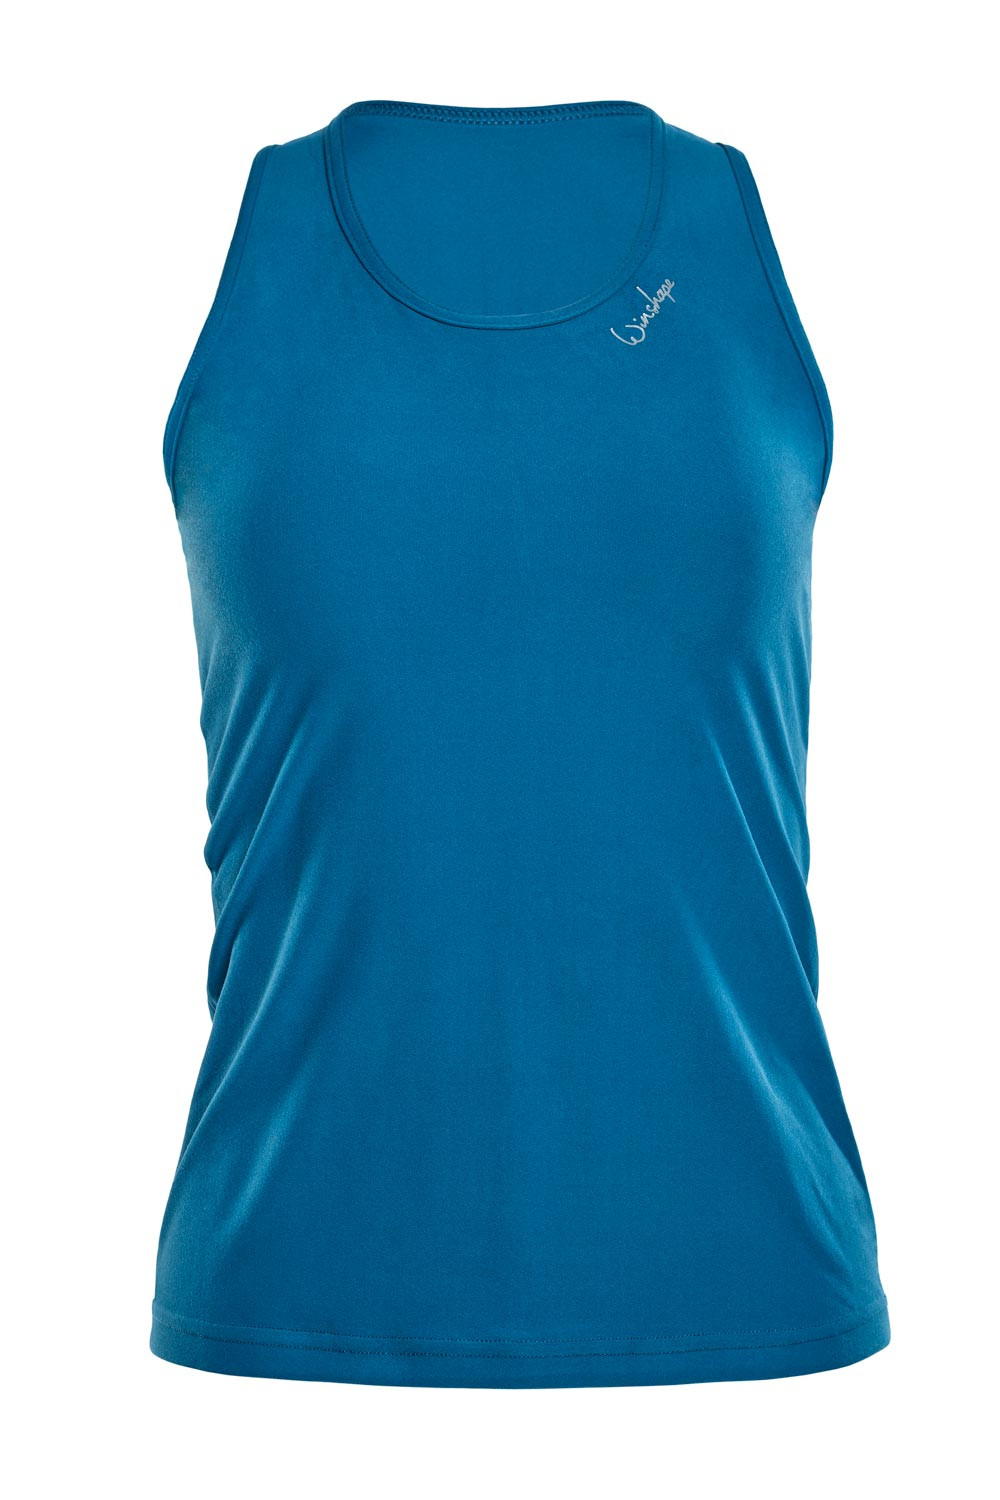 Functional Light and Soft Tanktop AET124LS, teal green, Winshape Ultra Soft  Style